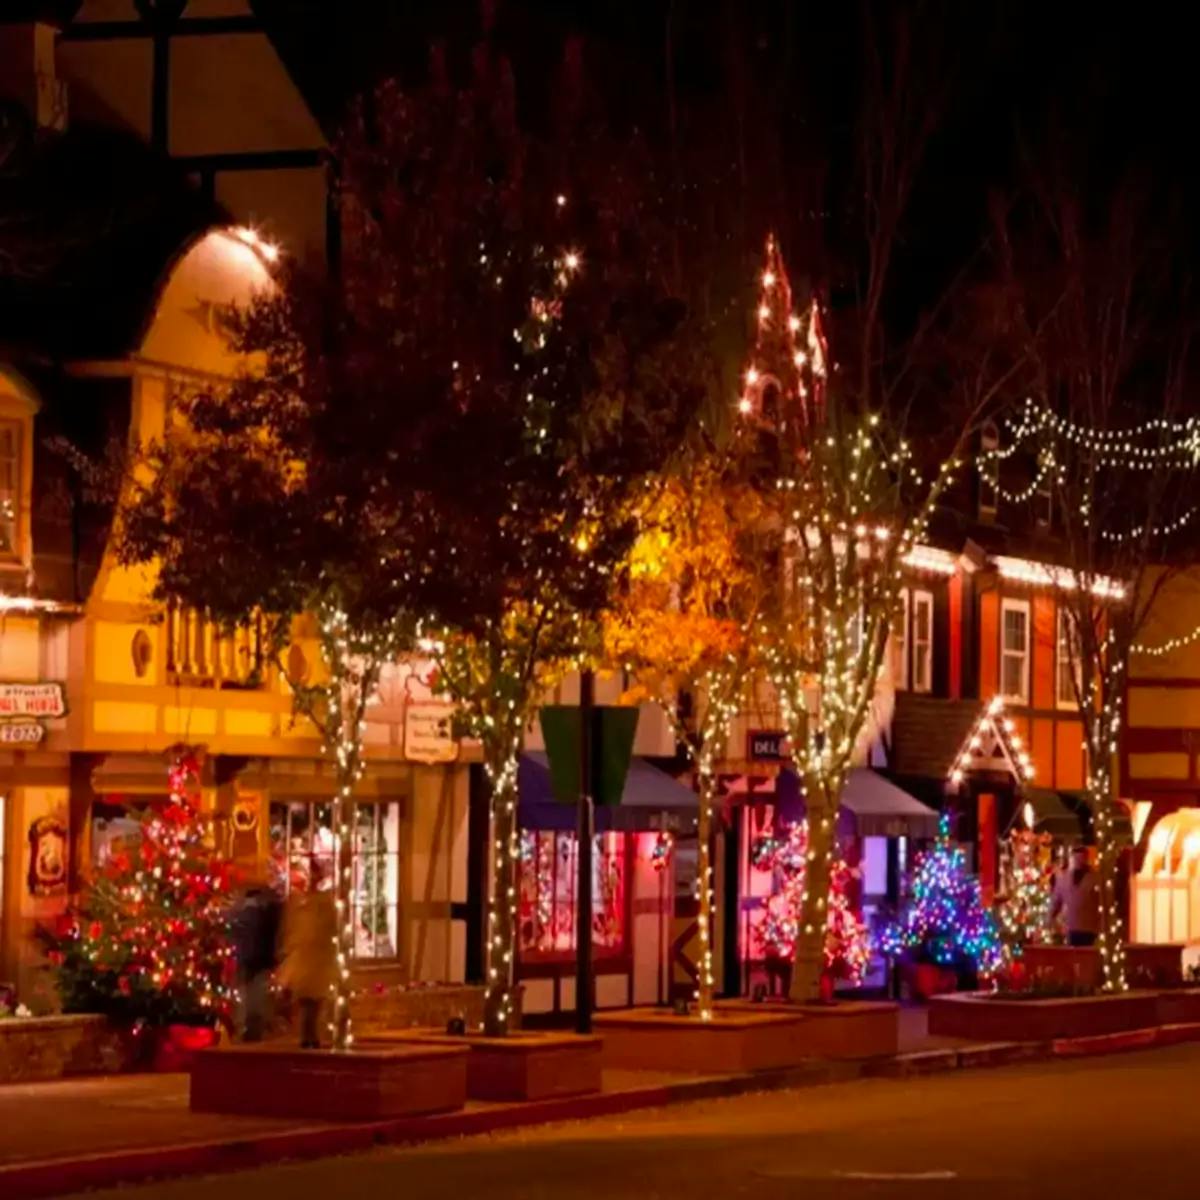  Danish-style high street in Solvang, CA, lit with Christmas lights during Julefest.